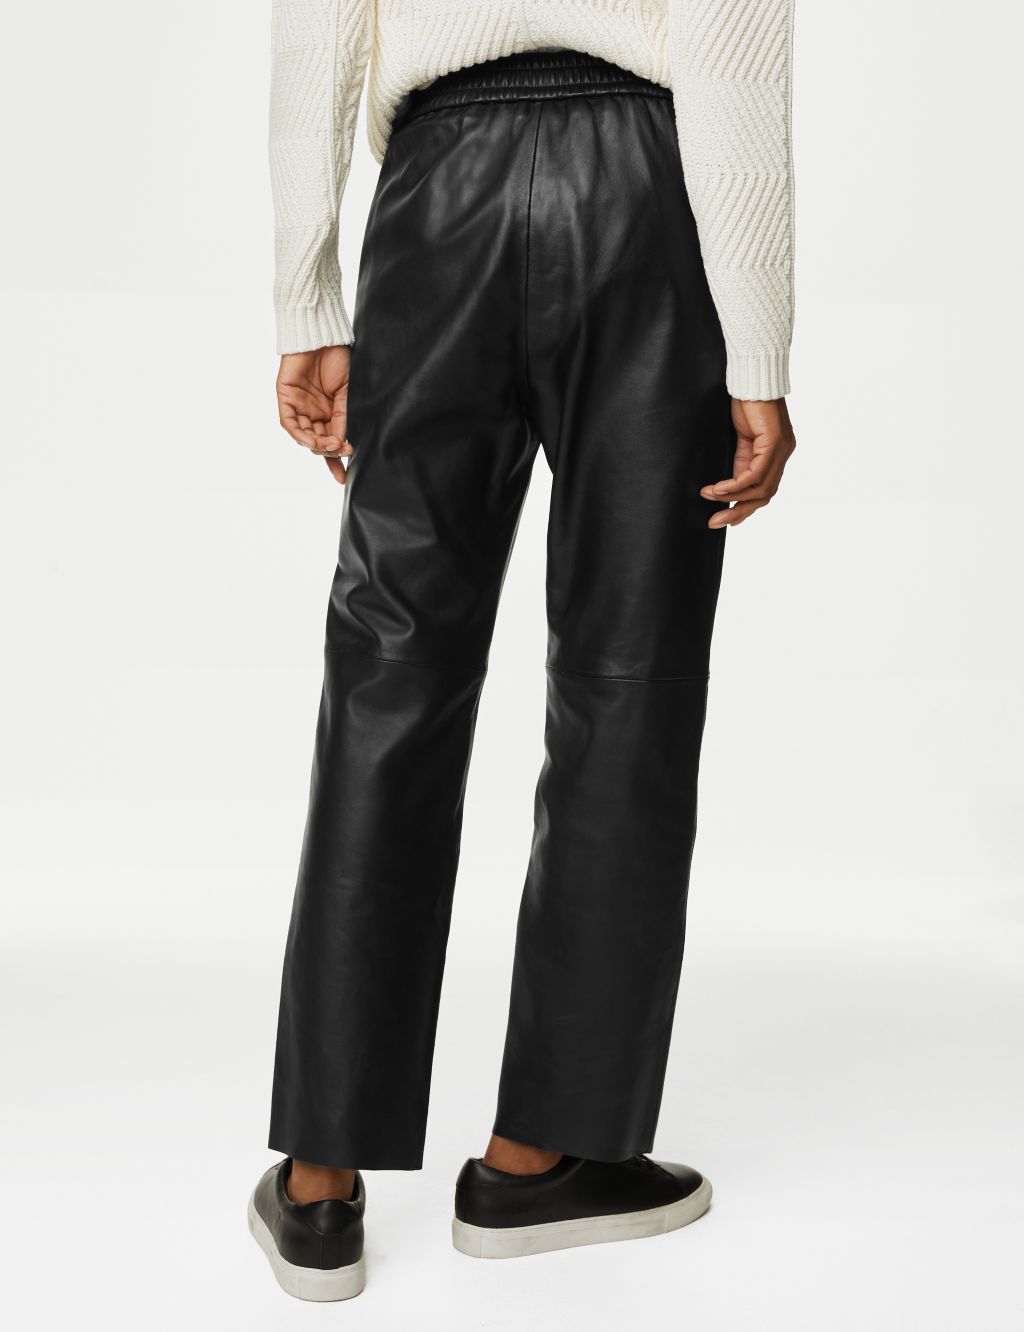 Buy Leather Straight Leg Trousers | Autograph | M&S